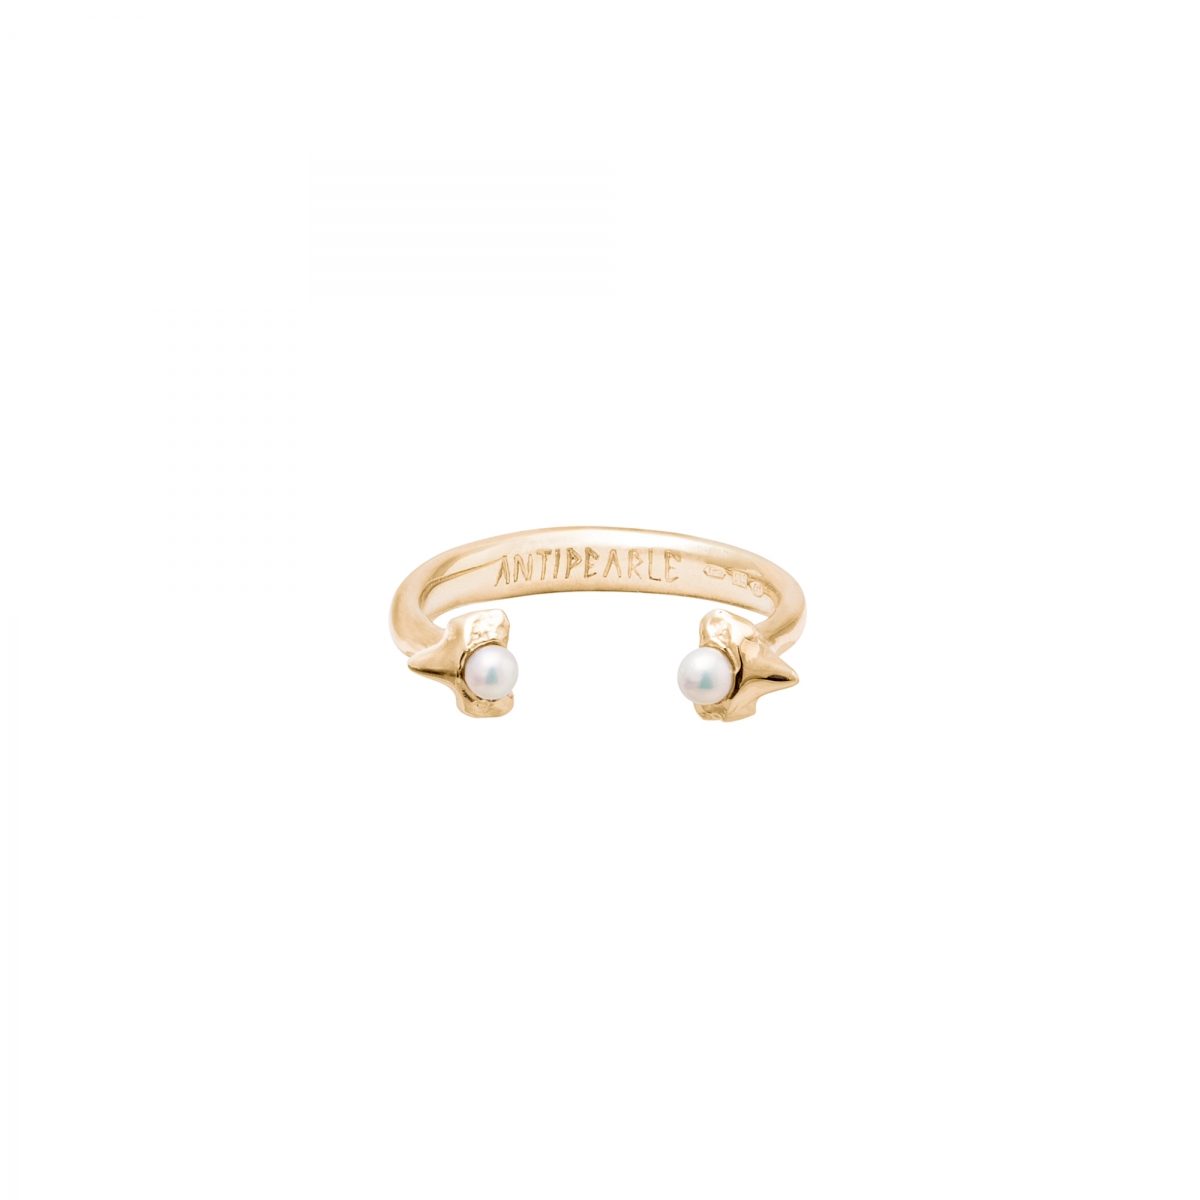 Antipearle Petite A Double Tooth Ring Gold